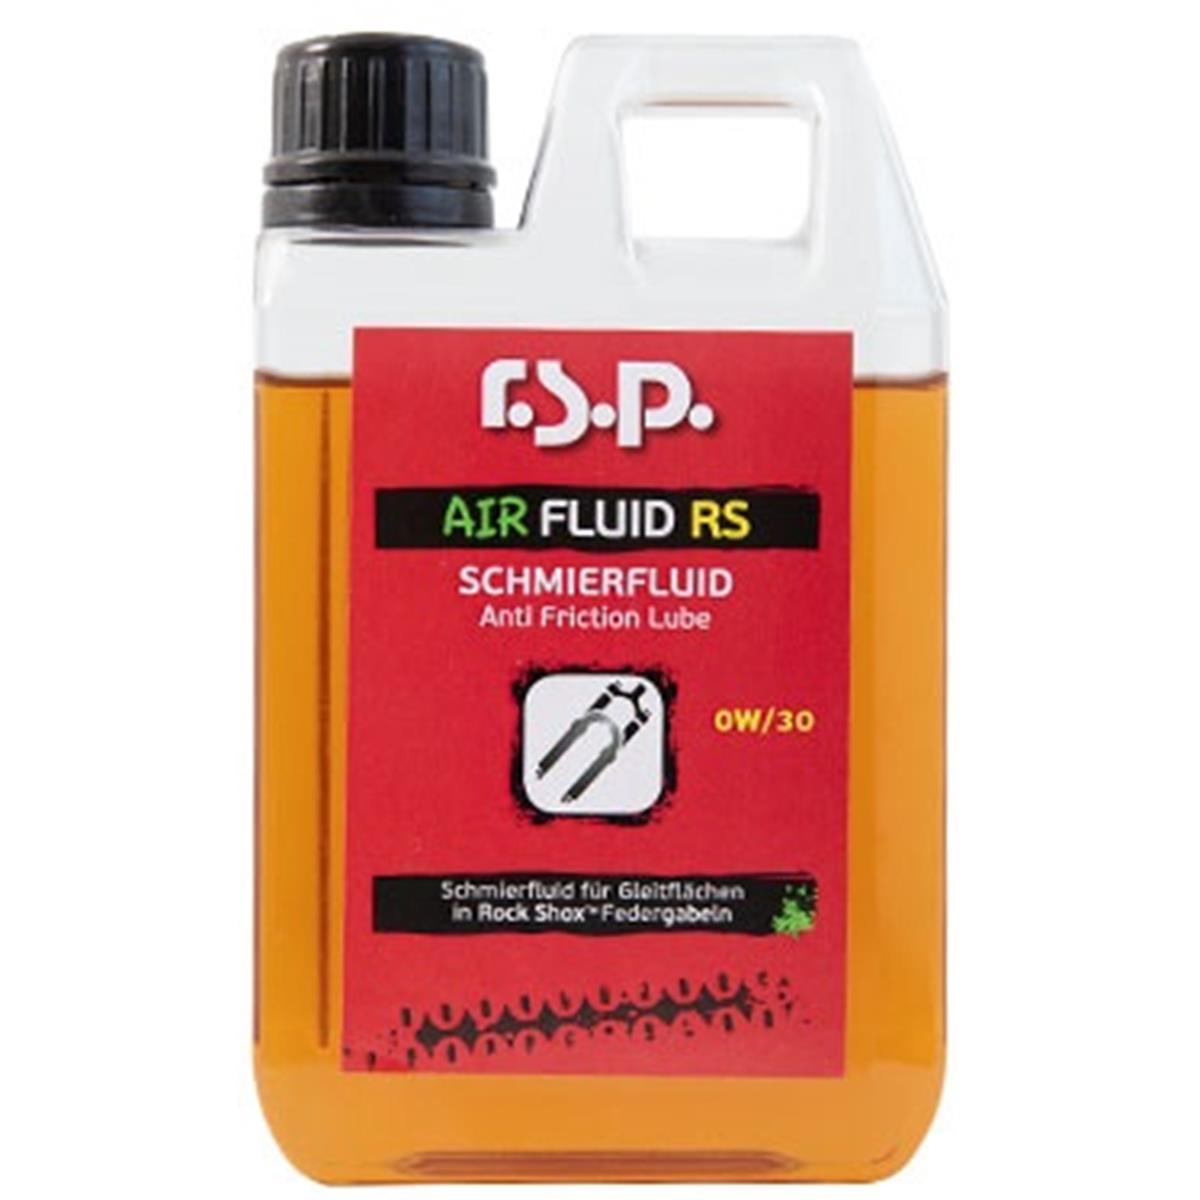 r.s.p. Suspension Oil Air Fluid For Rock Shox Forks and rear Shocks, 0W/30